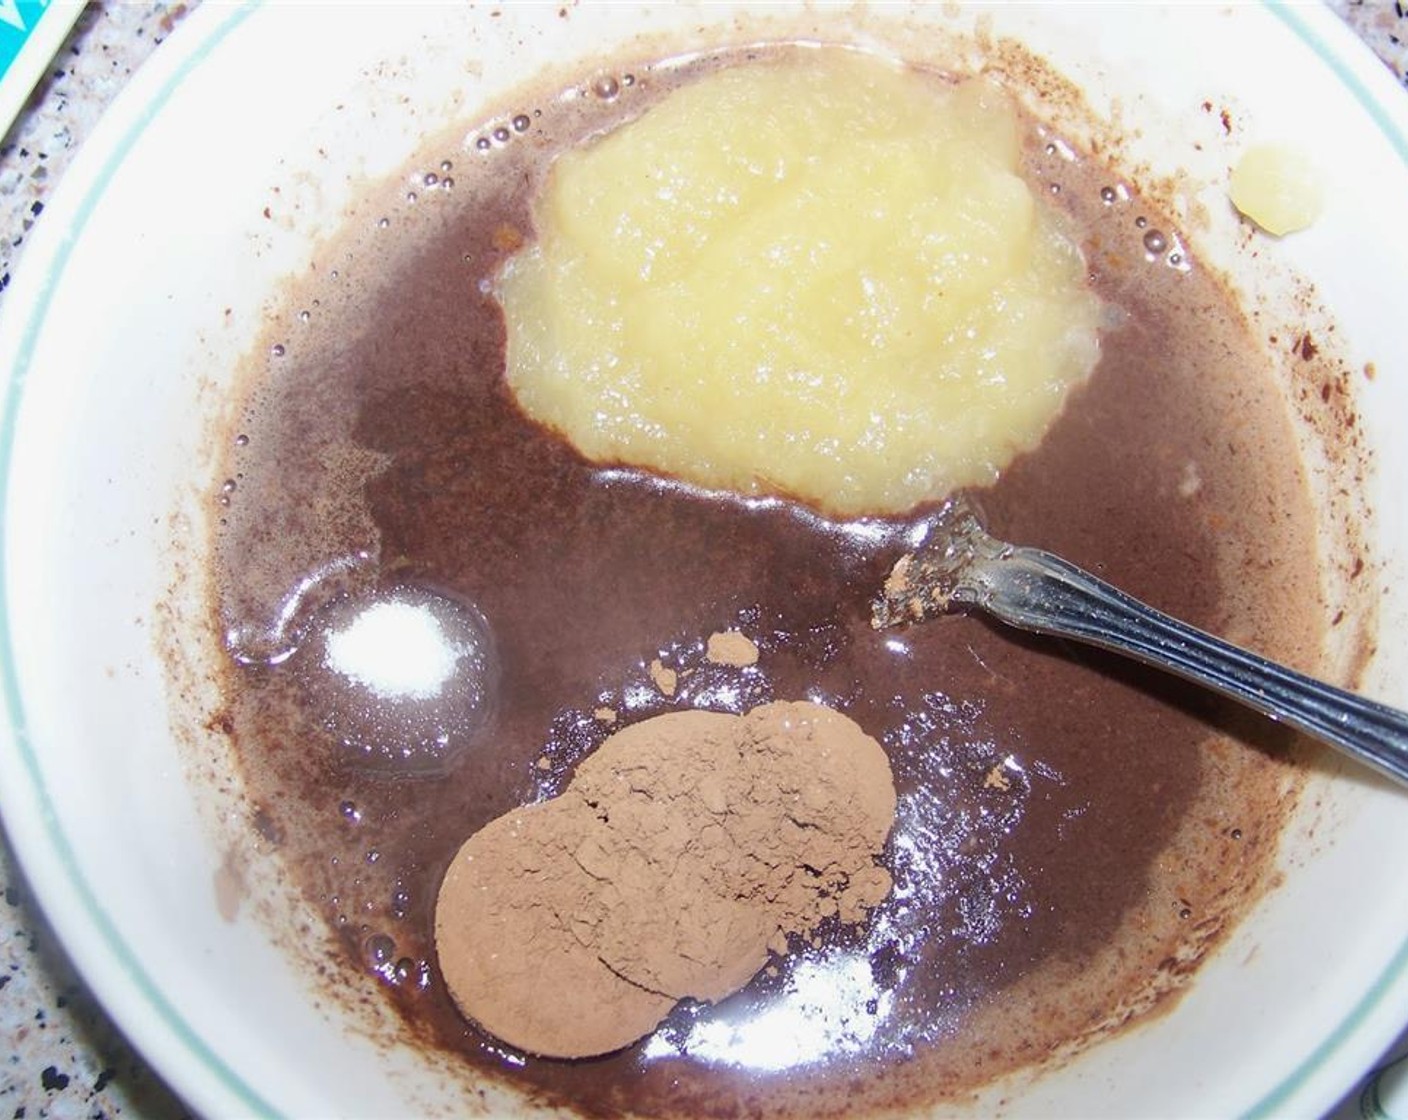 step 2 Into the melted chocolate, add the Apple Sauce (1/4 cup), Vanilla Extract (1/2 tsp), Unsweetened Cocoa Powder (1/2 Tbsp), and Granulated Sugar (1/2 Tbsp). Mix well.